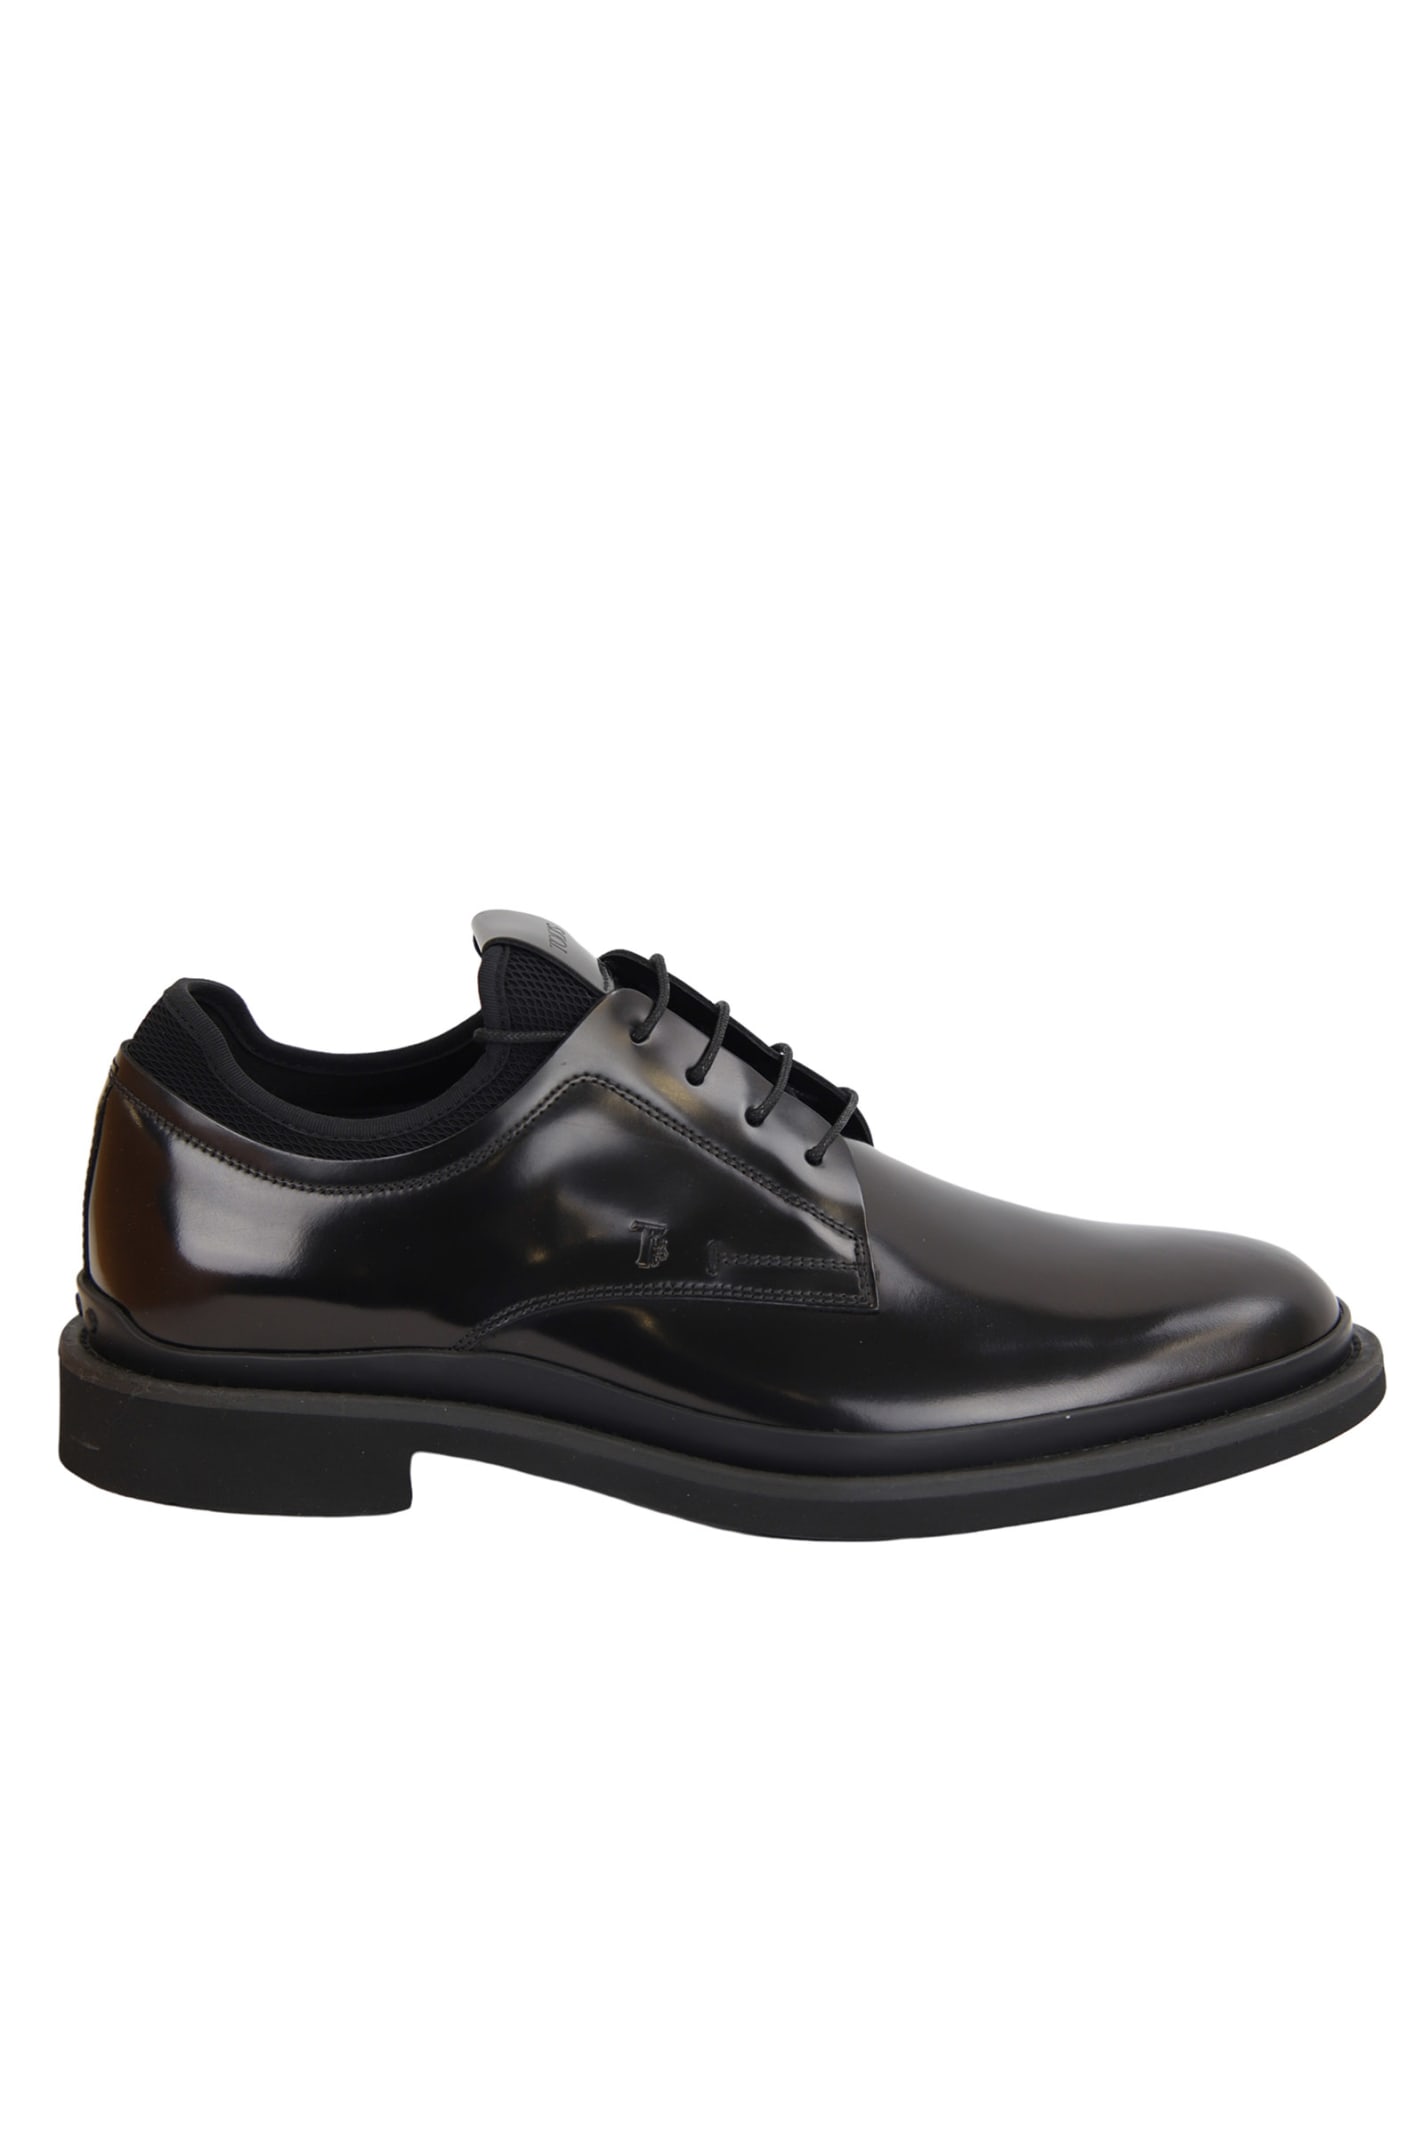 Tods Engraved Logo Derby Shoes